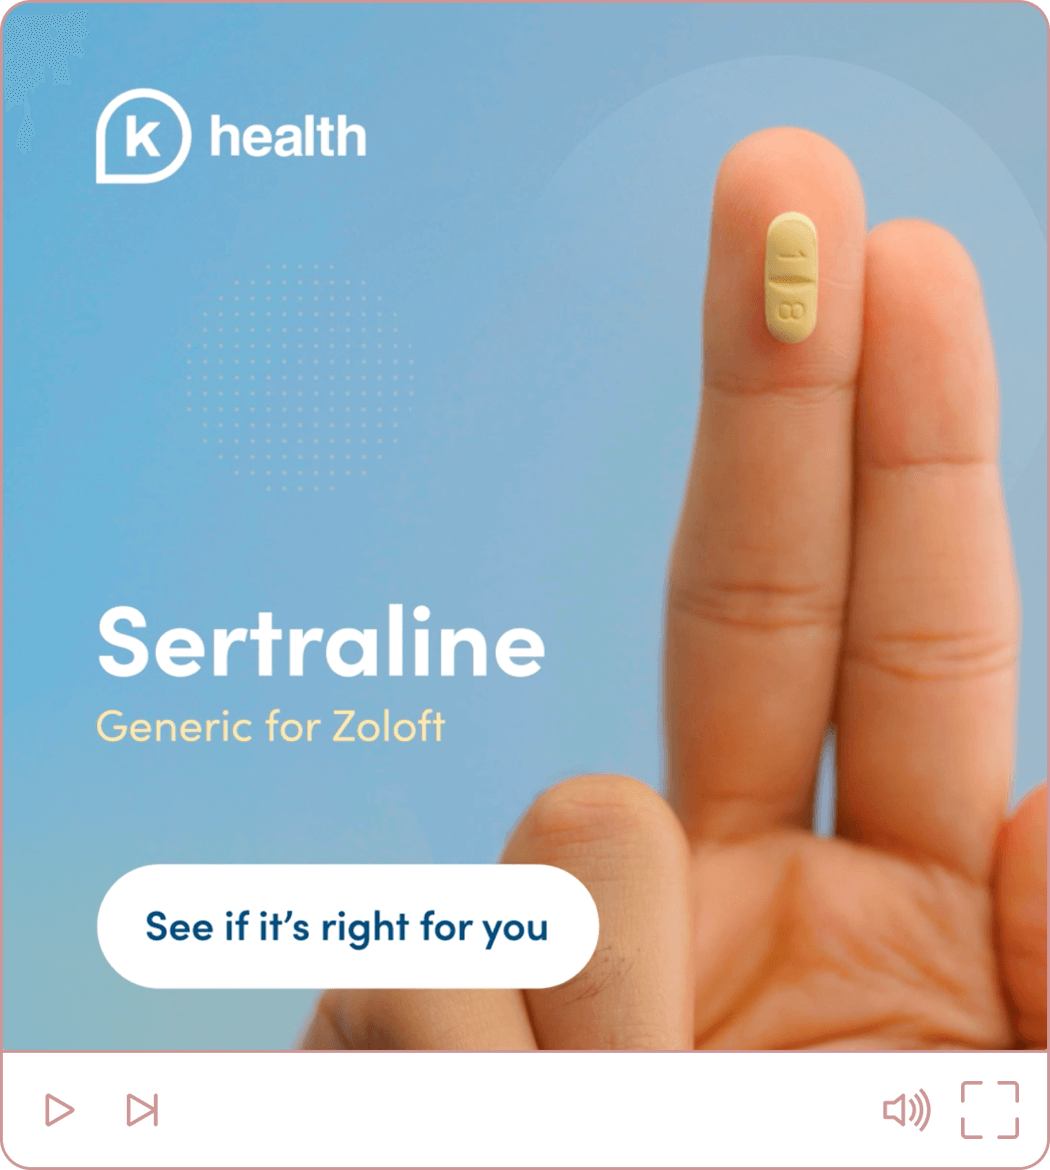 Ad for 100mg of sertraline featuring a hand holding a pill, the medication name, and the K Health logo